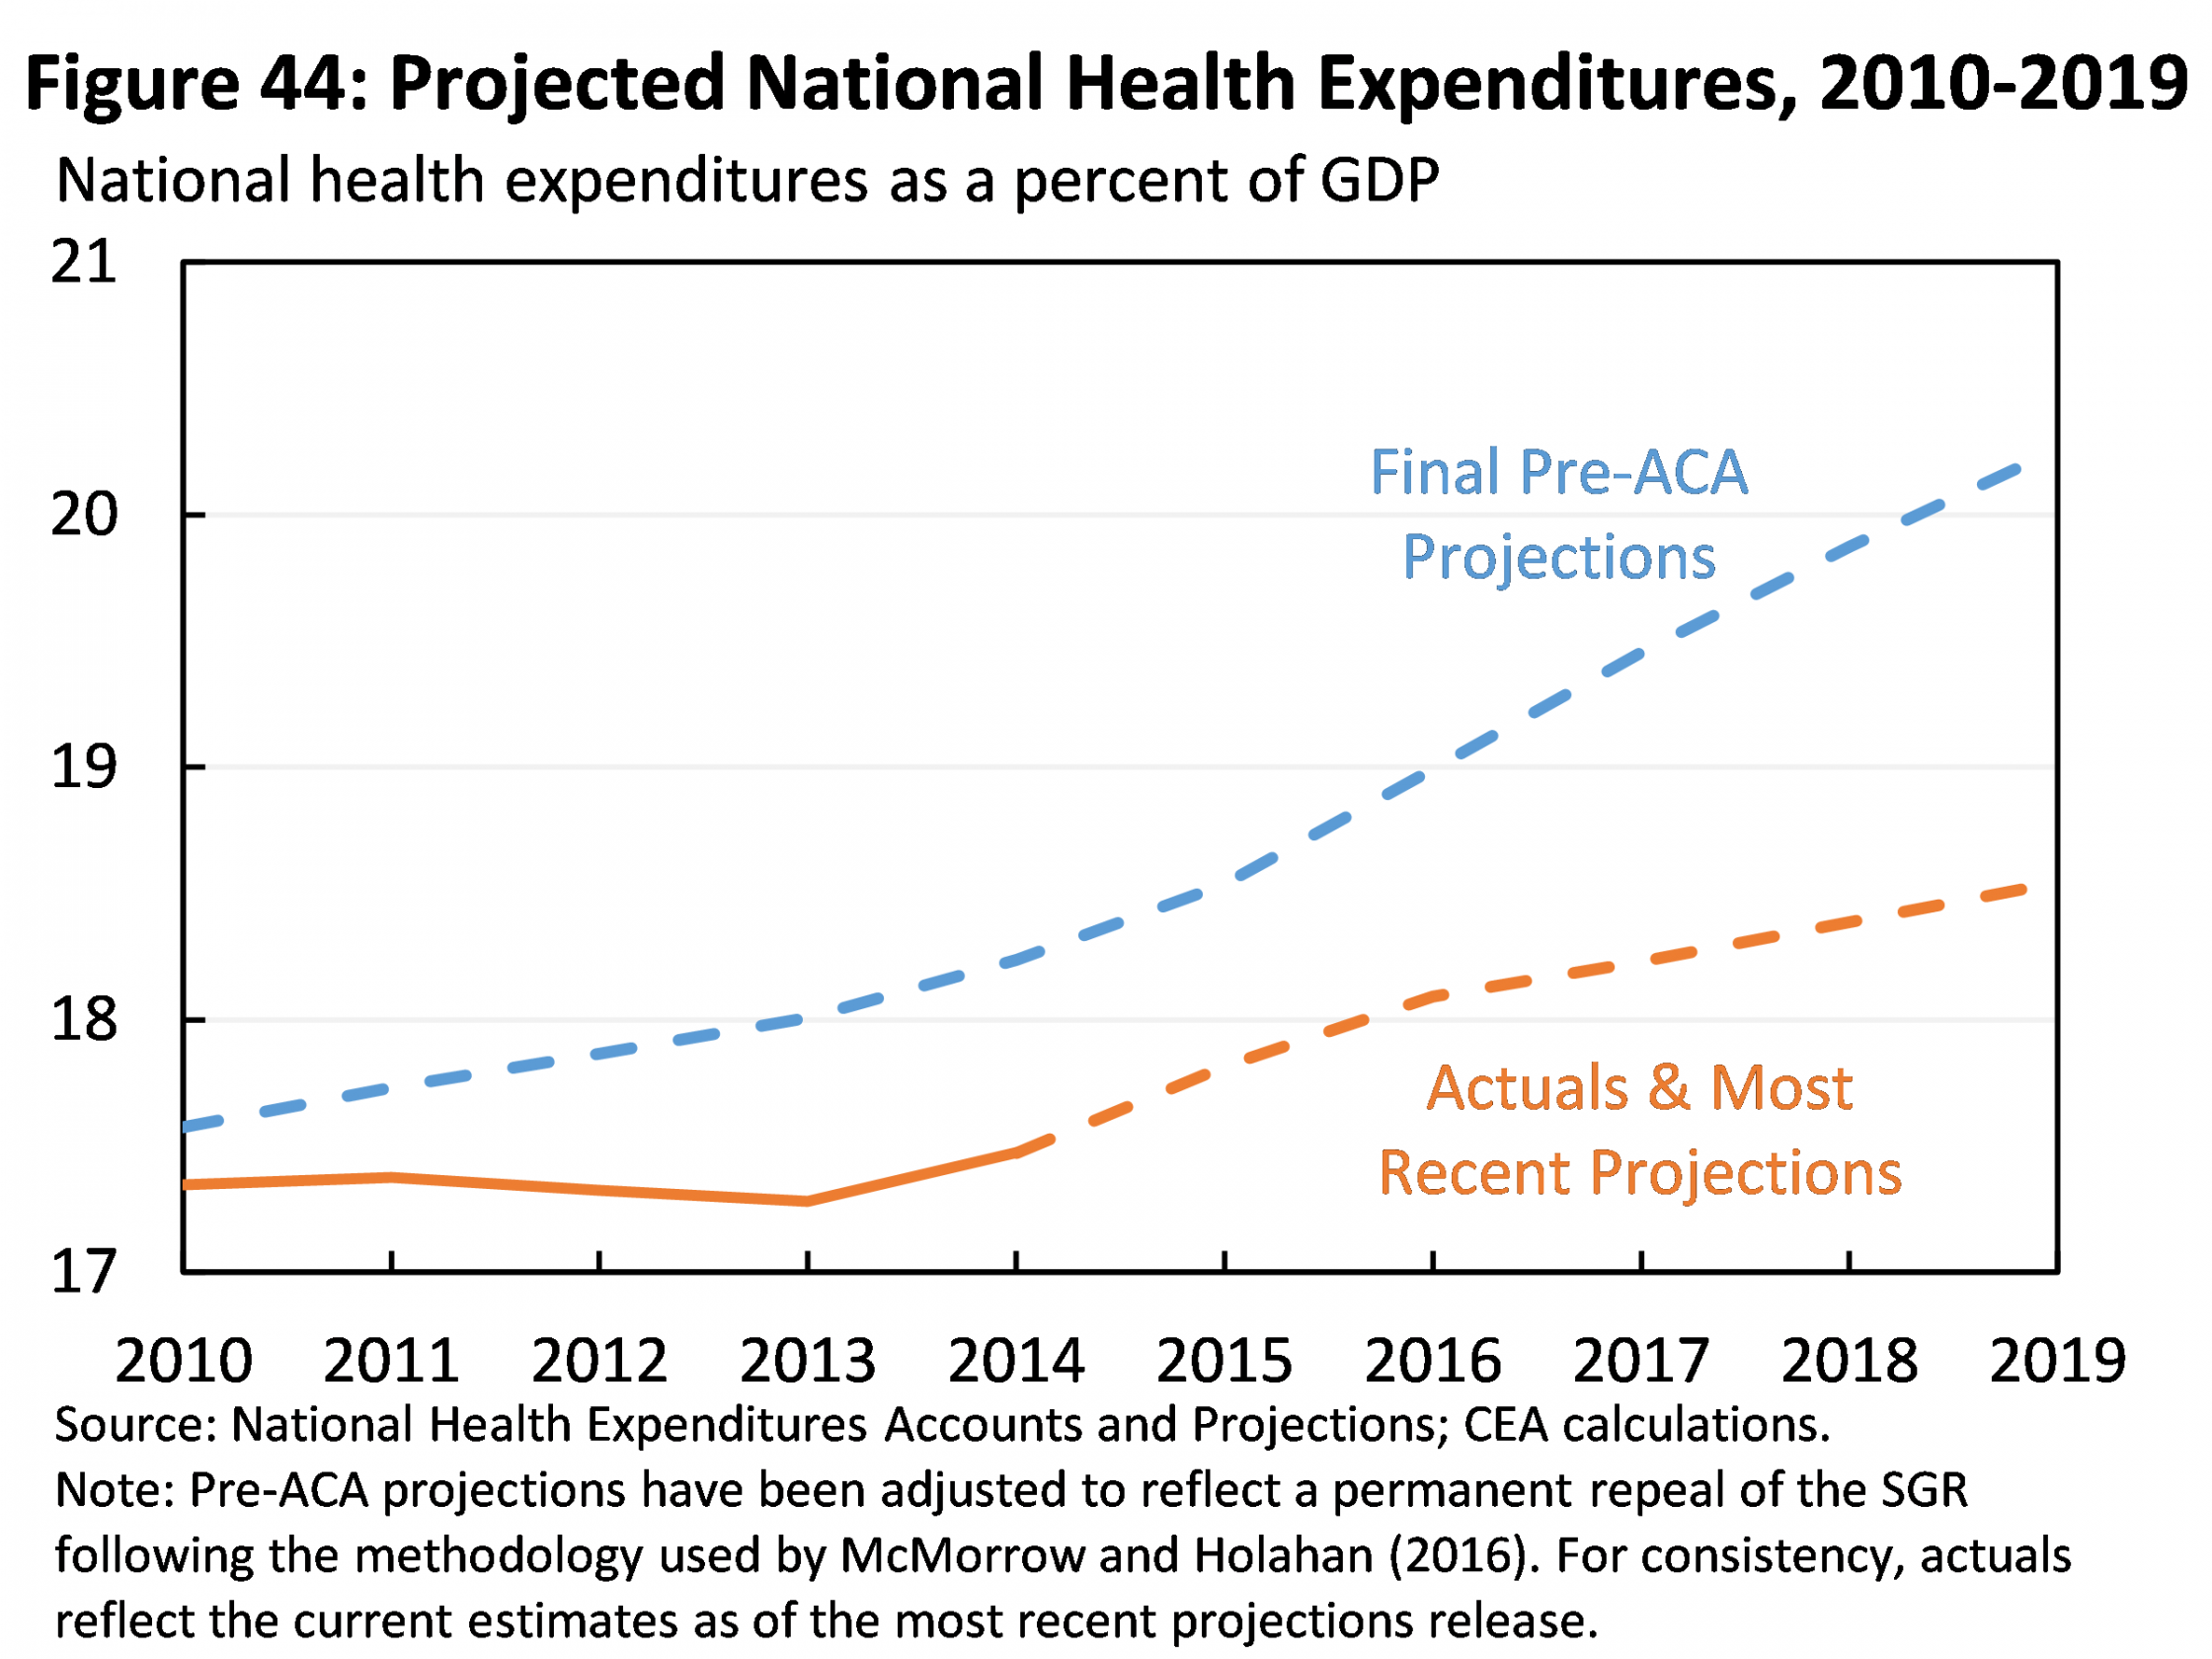 Projected National Health Expenditures, 2010-2019